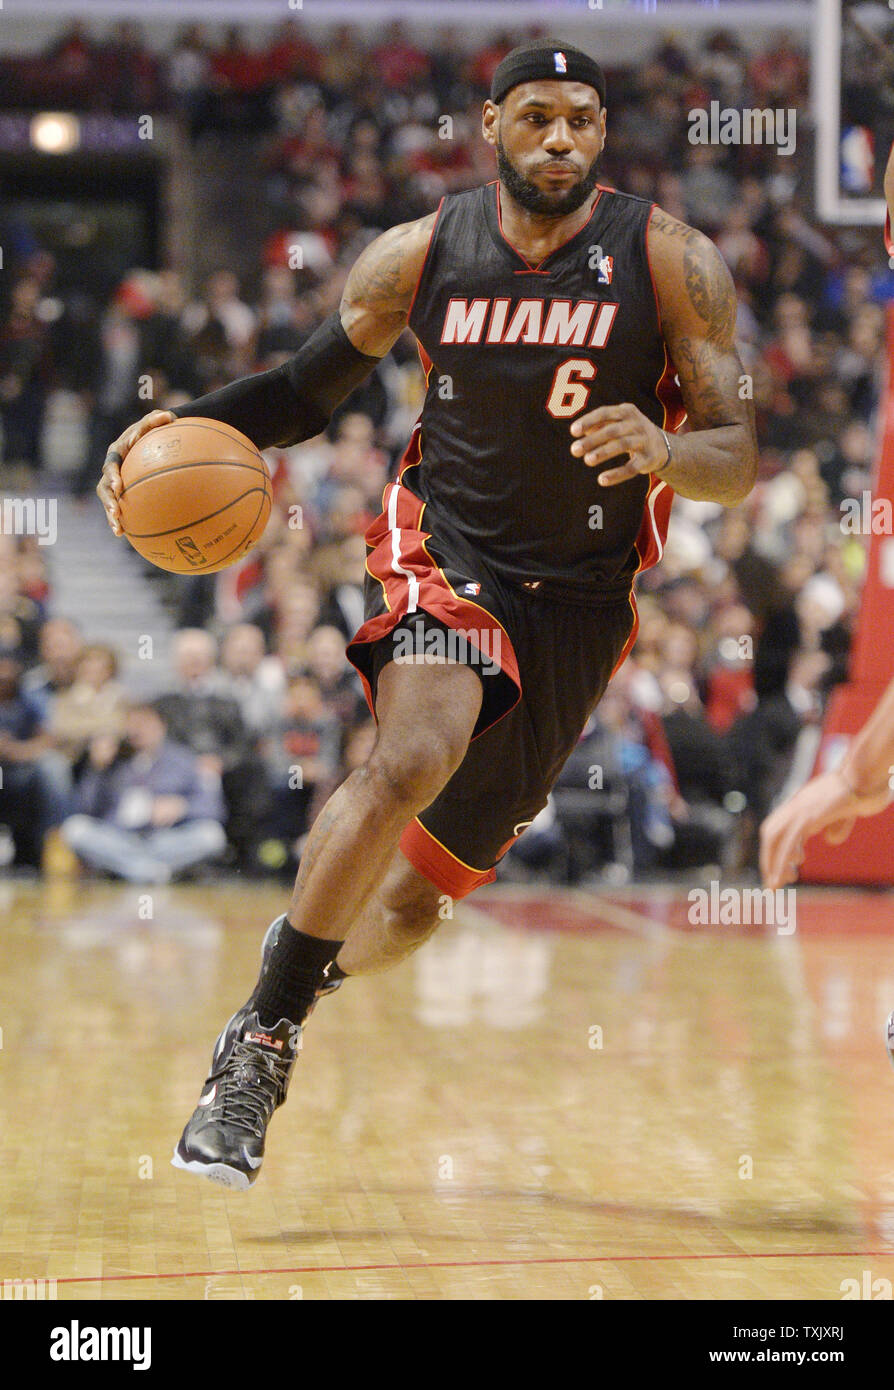 Miami Heat forward LeBron James drives during the first quarter against the  Chicago Bulls at the United Center in Chicago on March 9, 2014. The Bulls  defeated the Heat 95-88 in overtime.